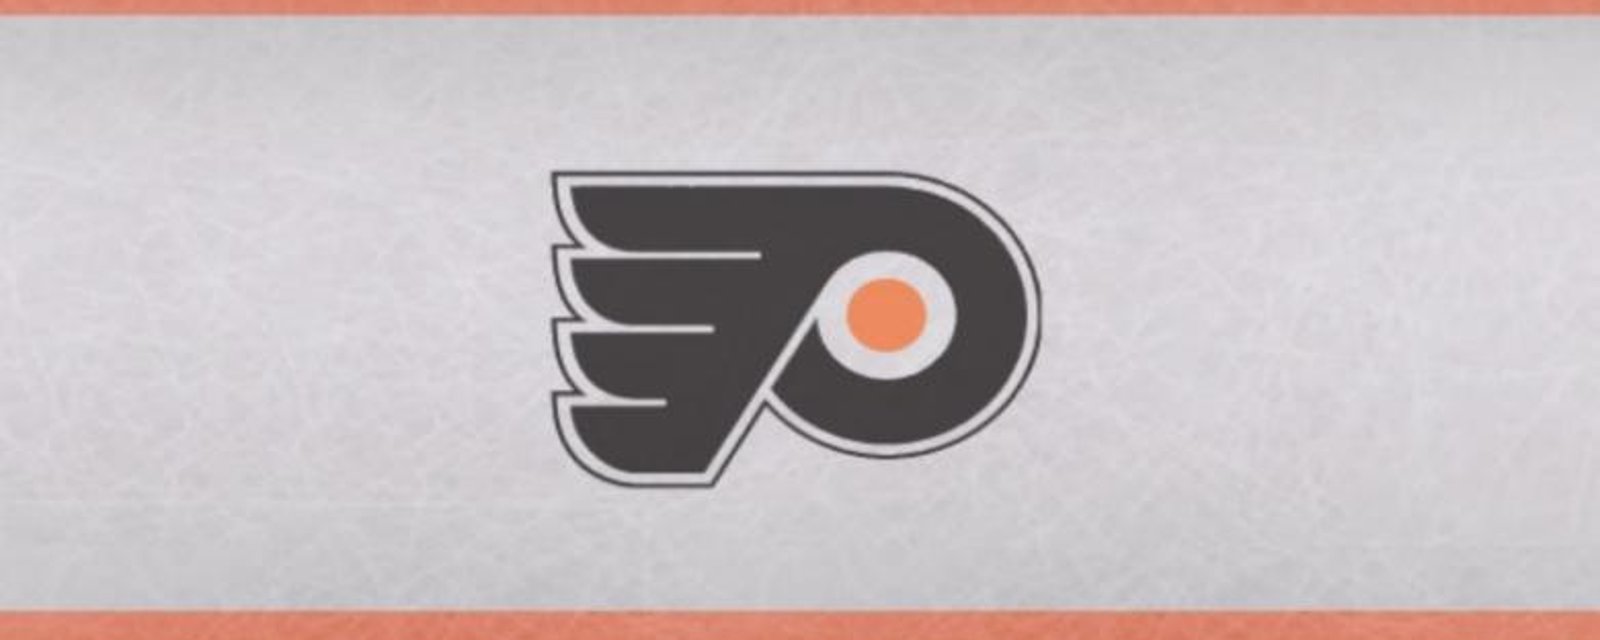 How Should The Flyers Handle Their Salary Cap Freedom?